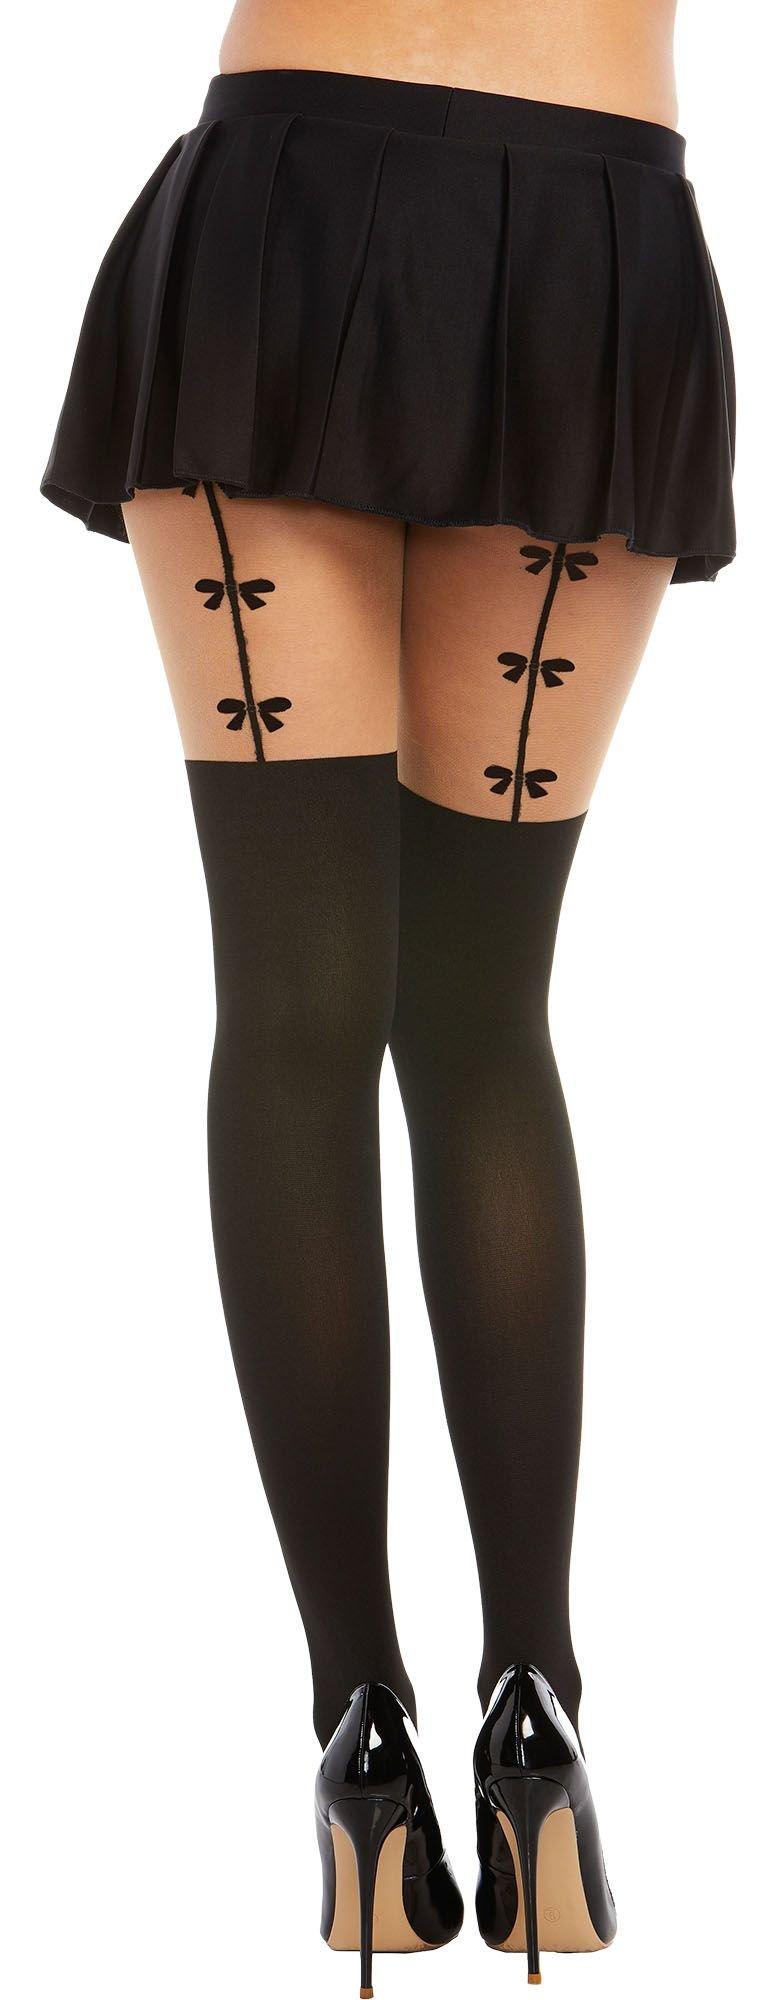 Black Opaque Pantyhose for Adults with Bow Garter